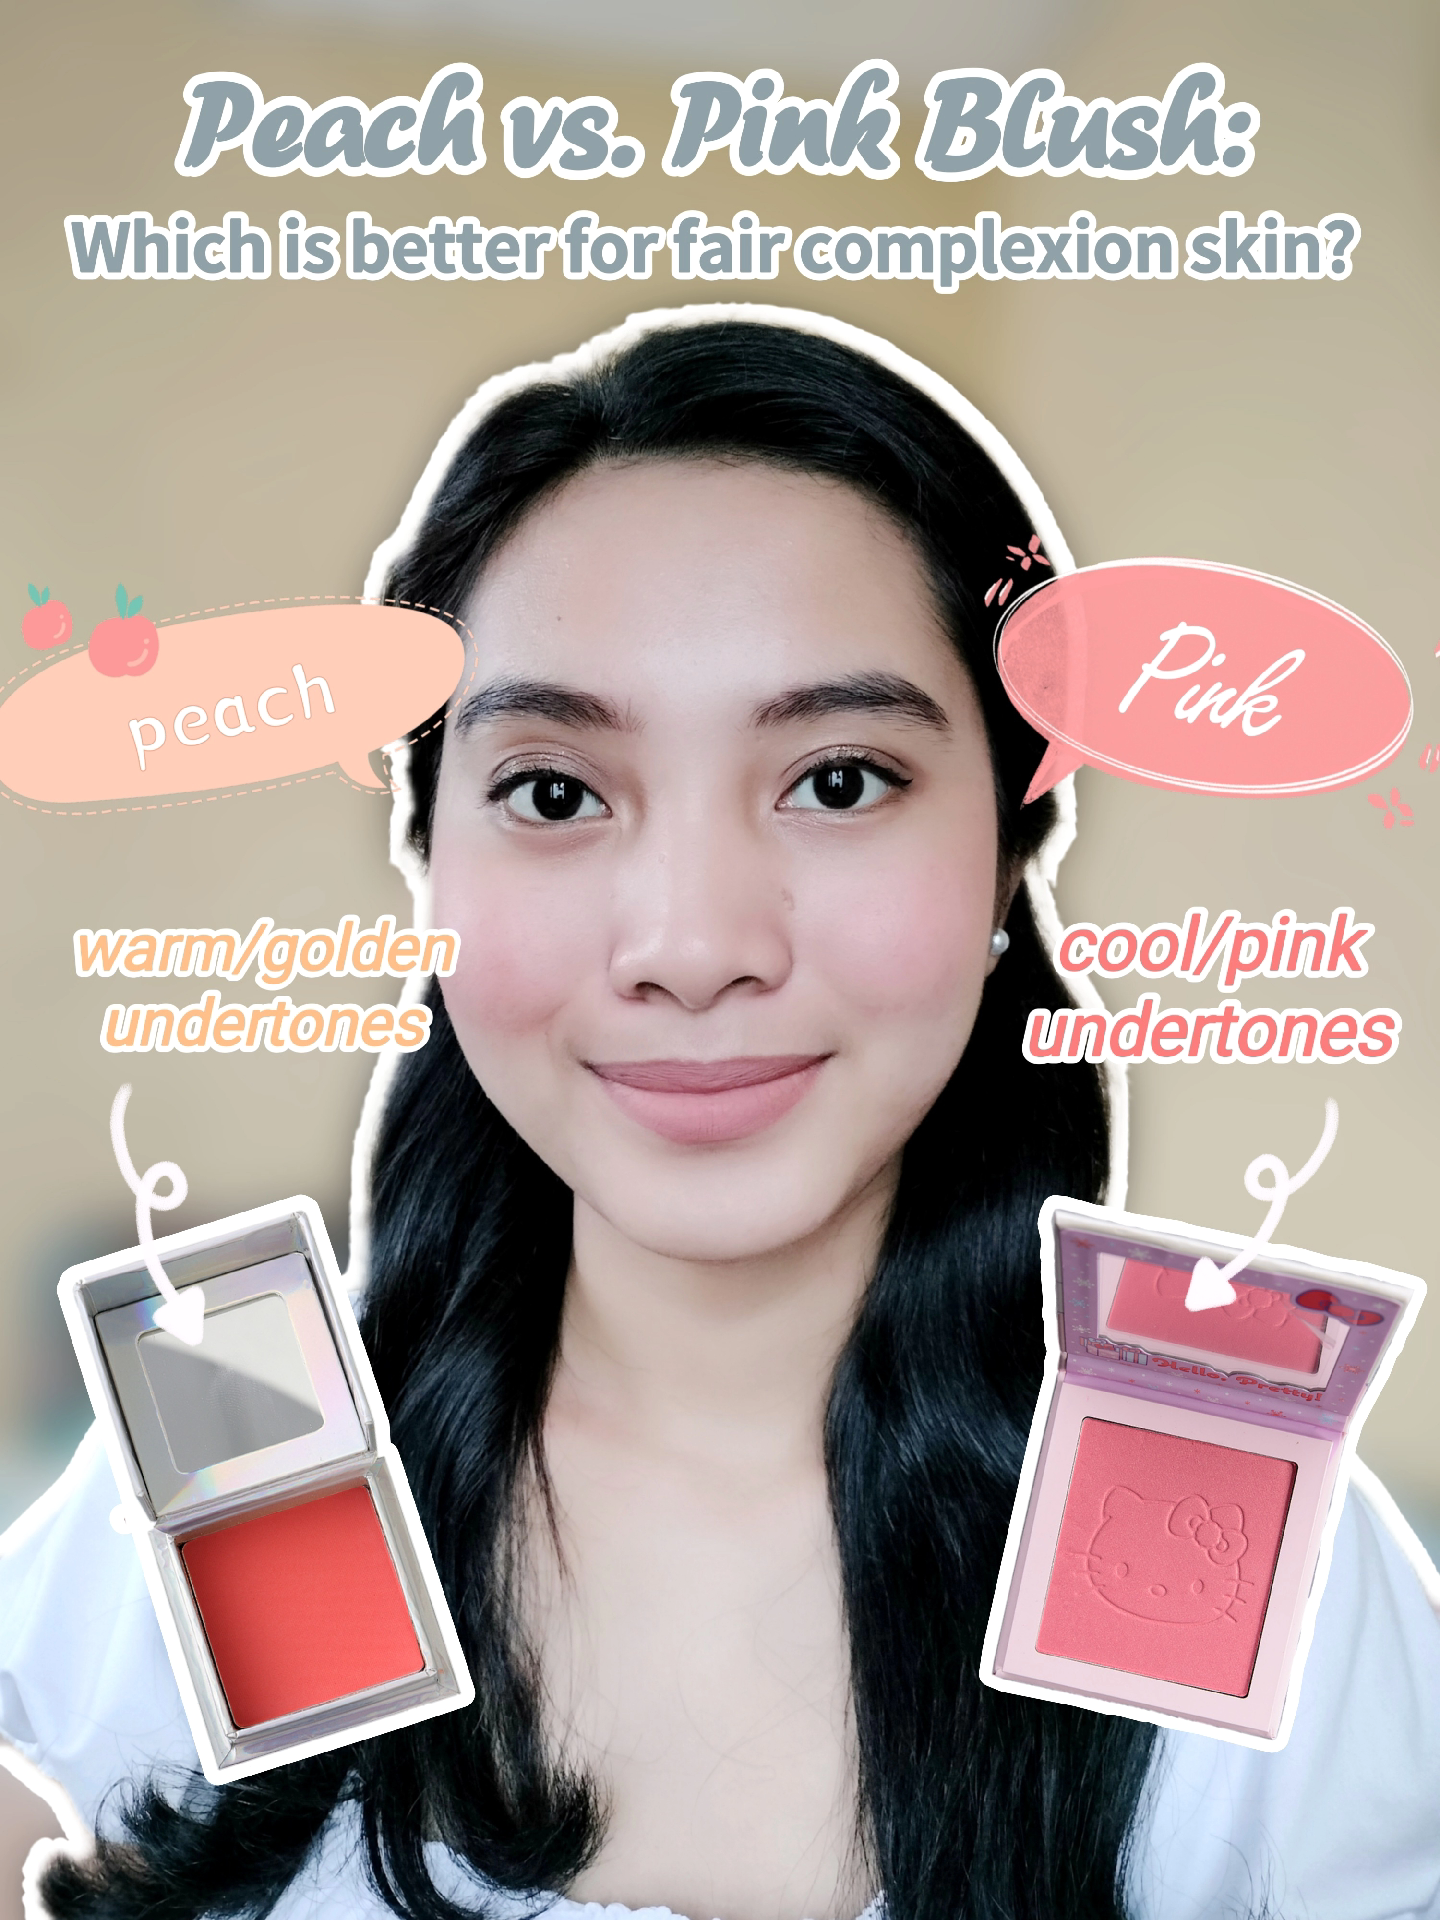 Pink vs. Peach Blush: Which is better for fair complexion skin